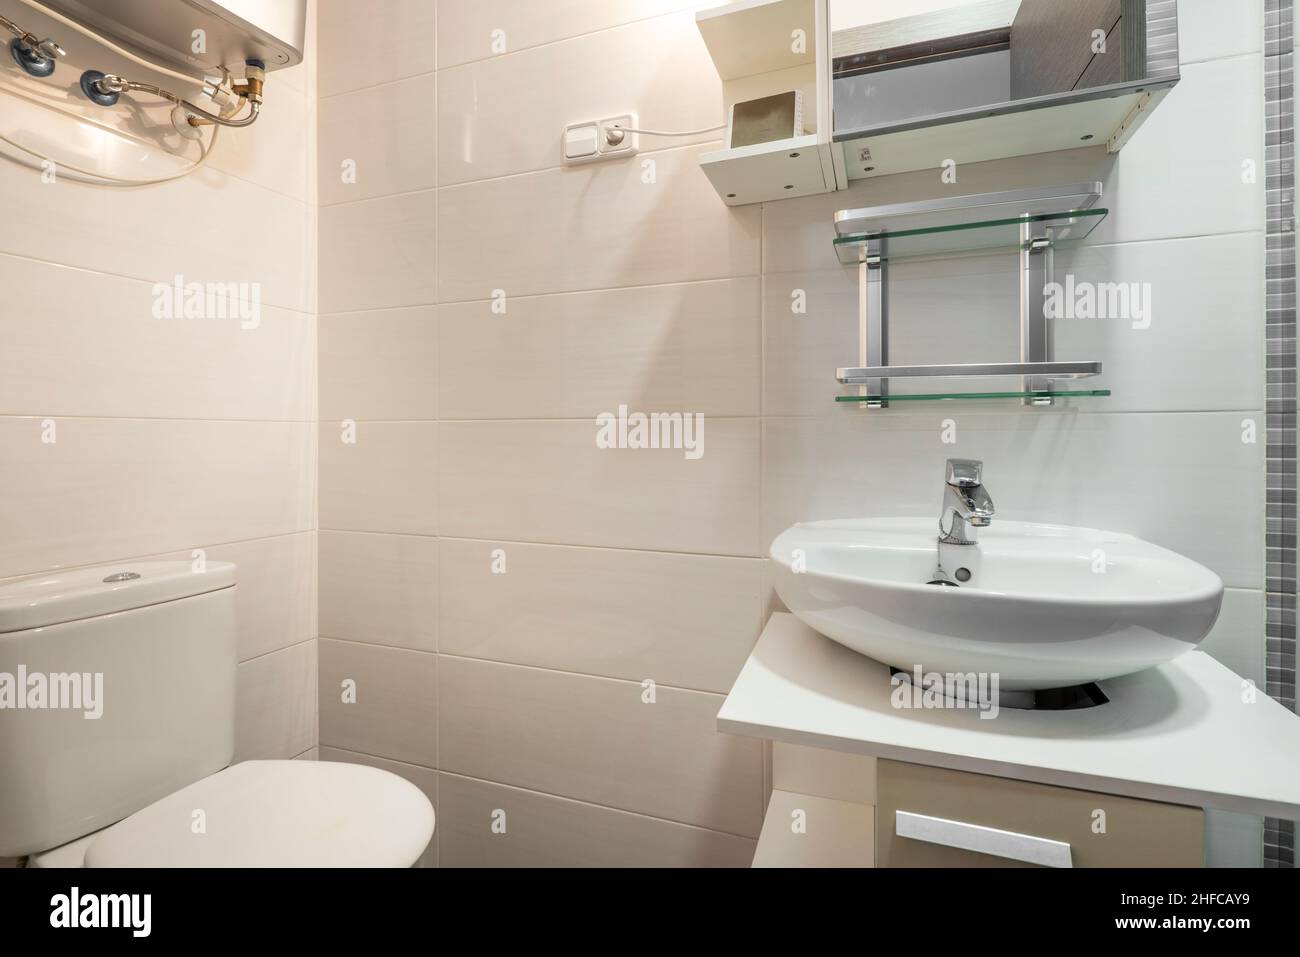 Small bathroom with porcelain sink and toilet Stock Photo